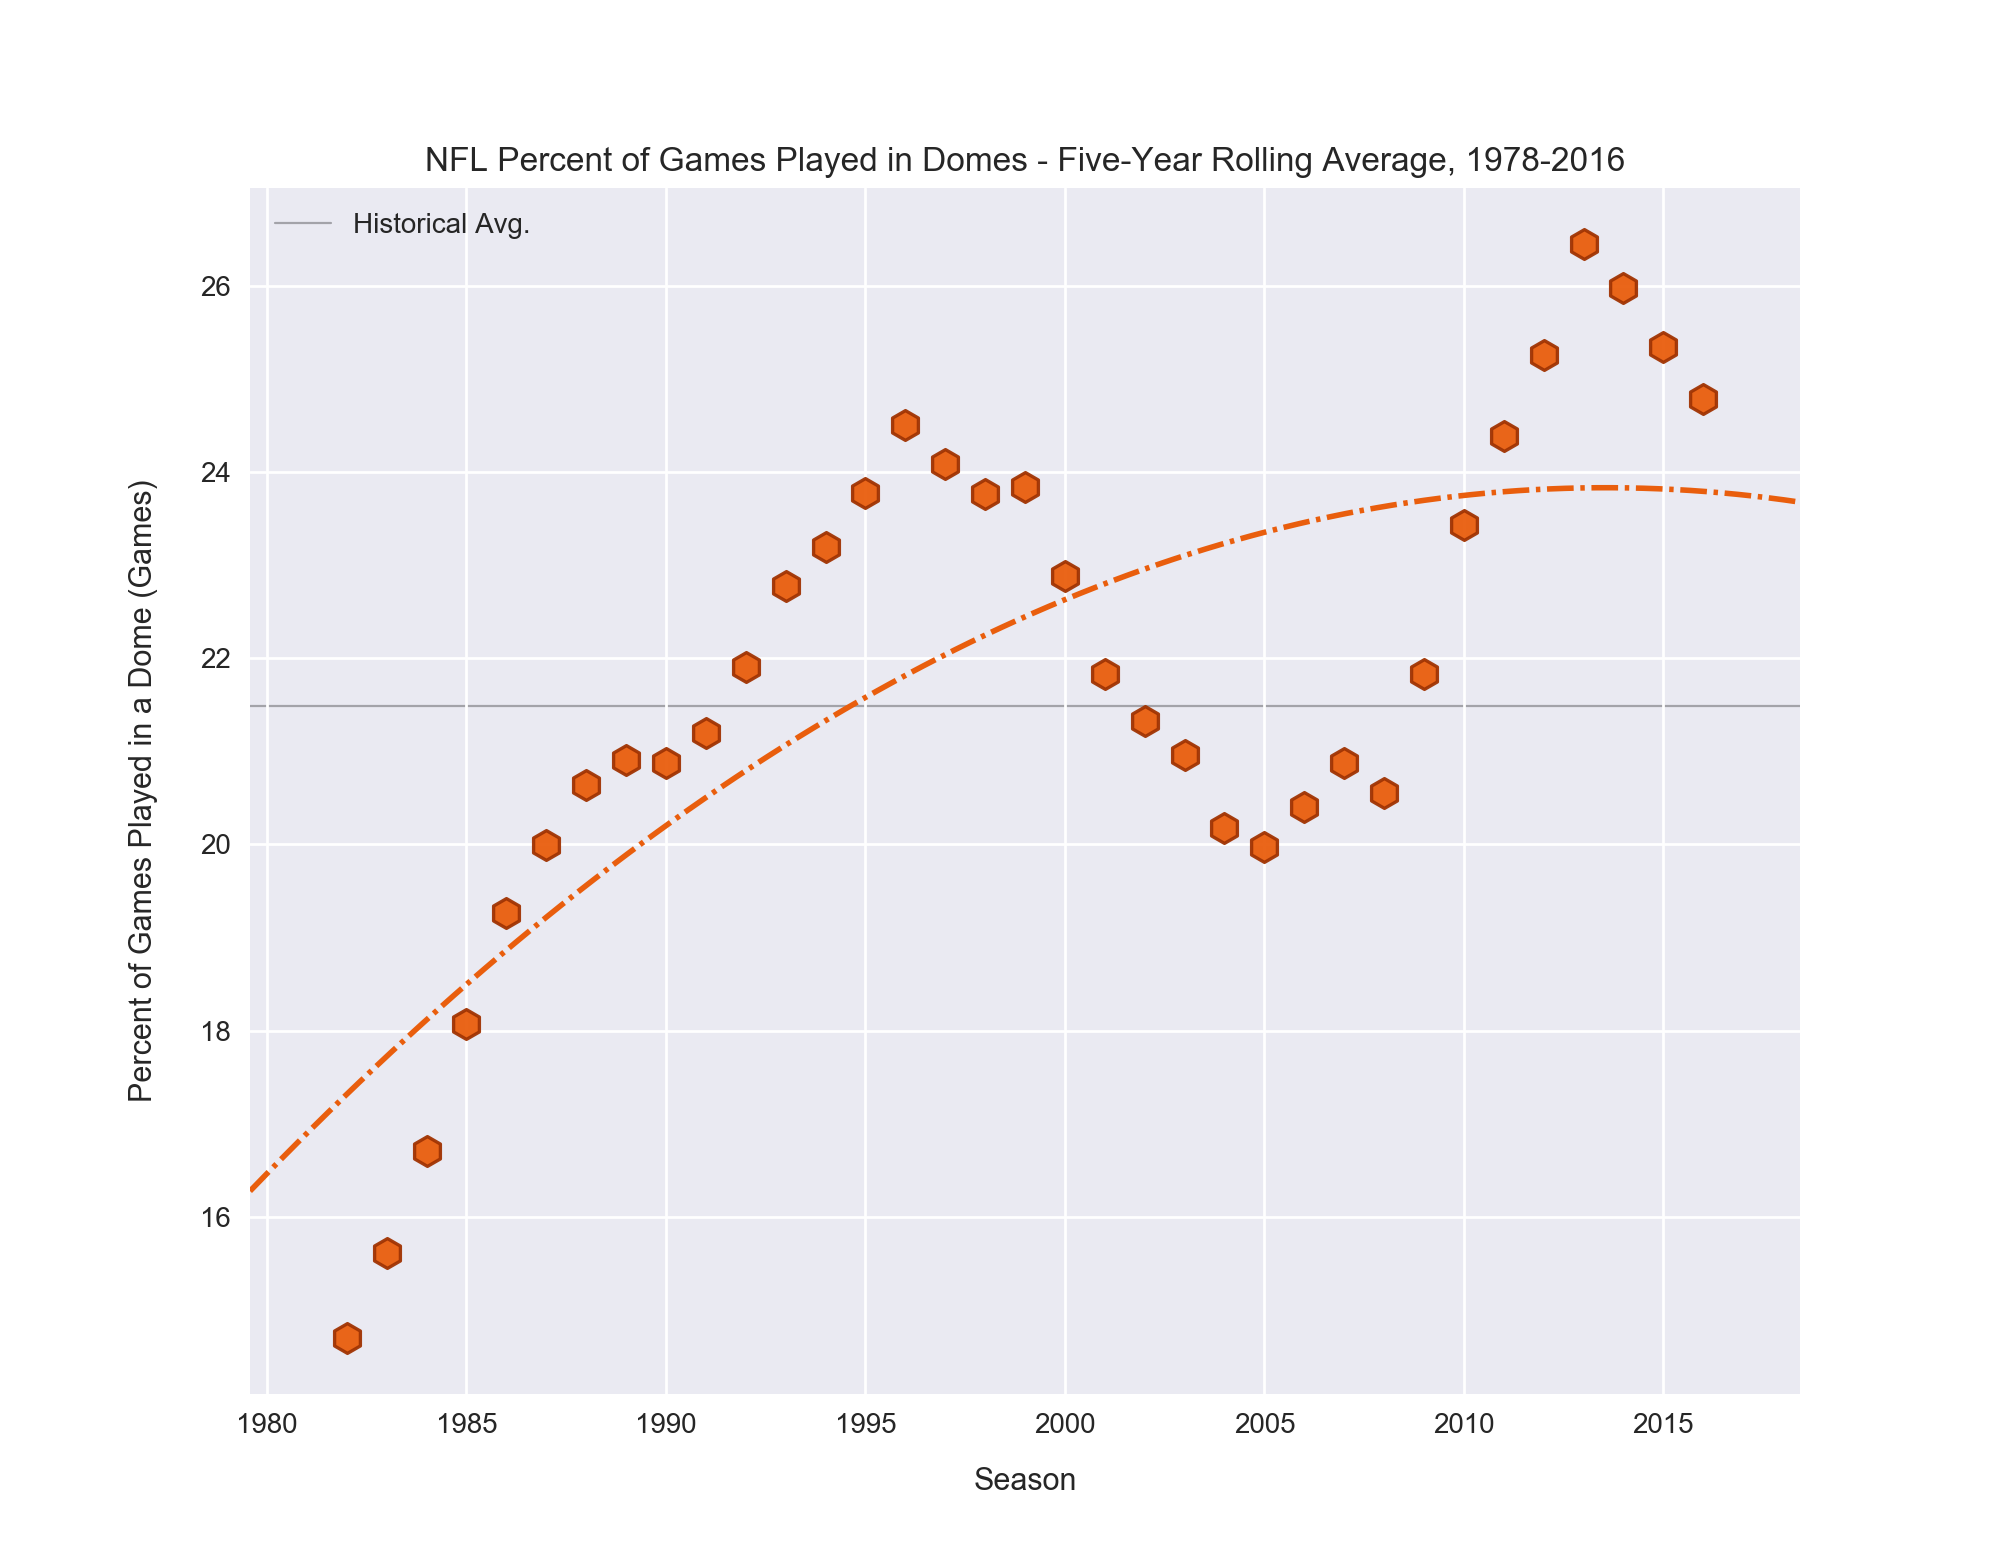 Percent of games per year in a dome